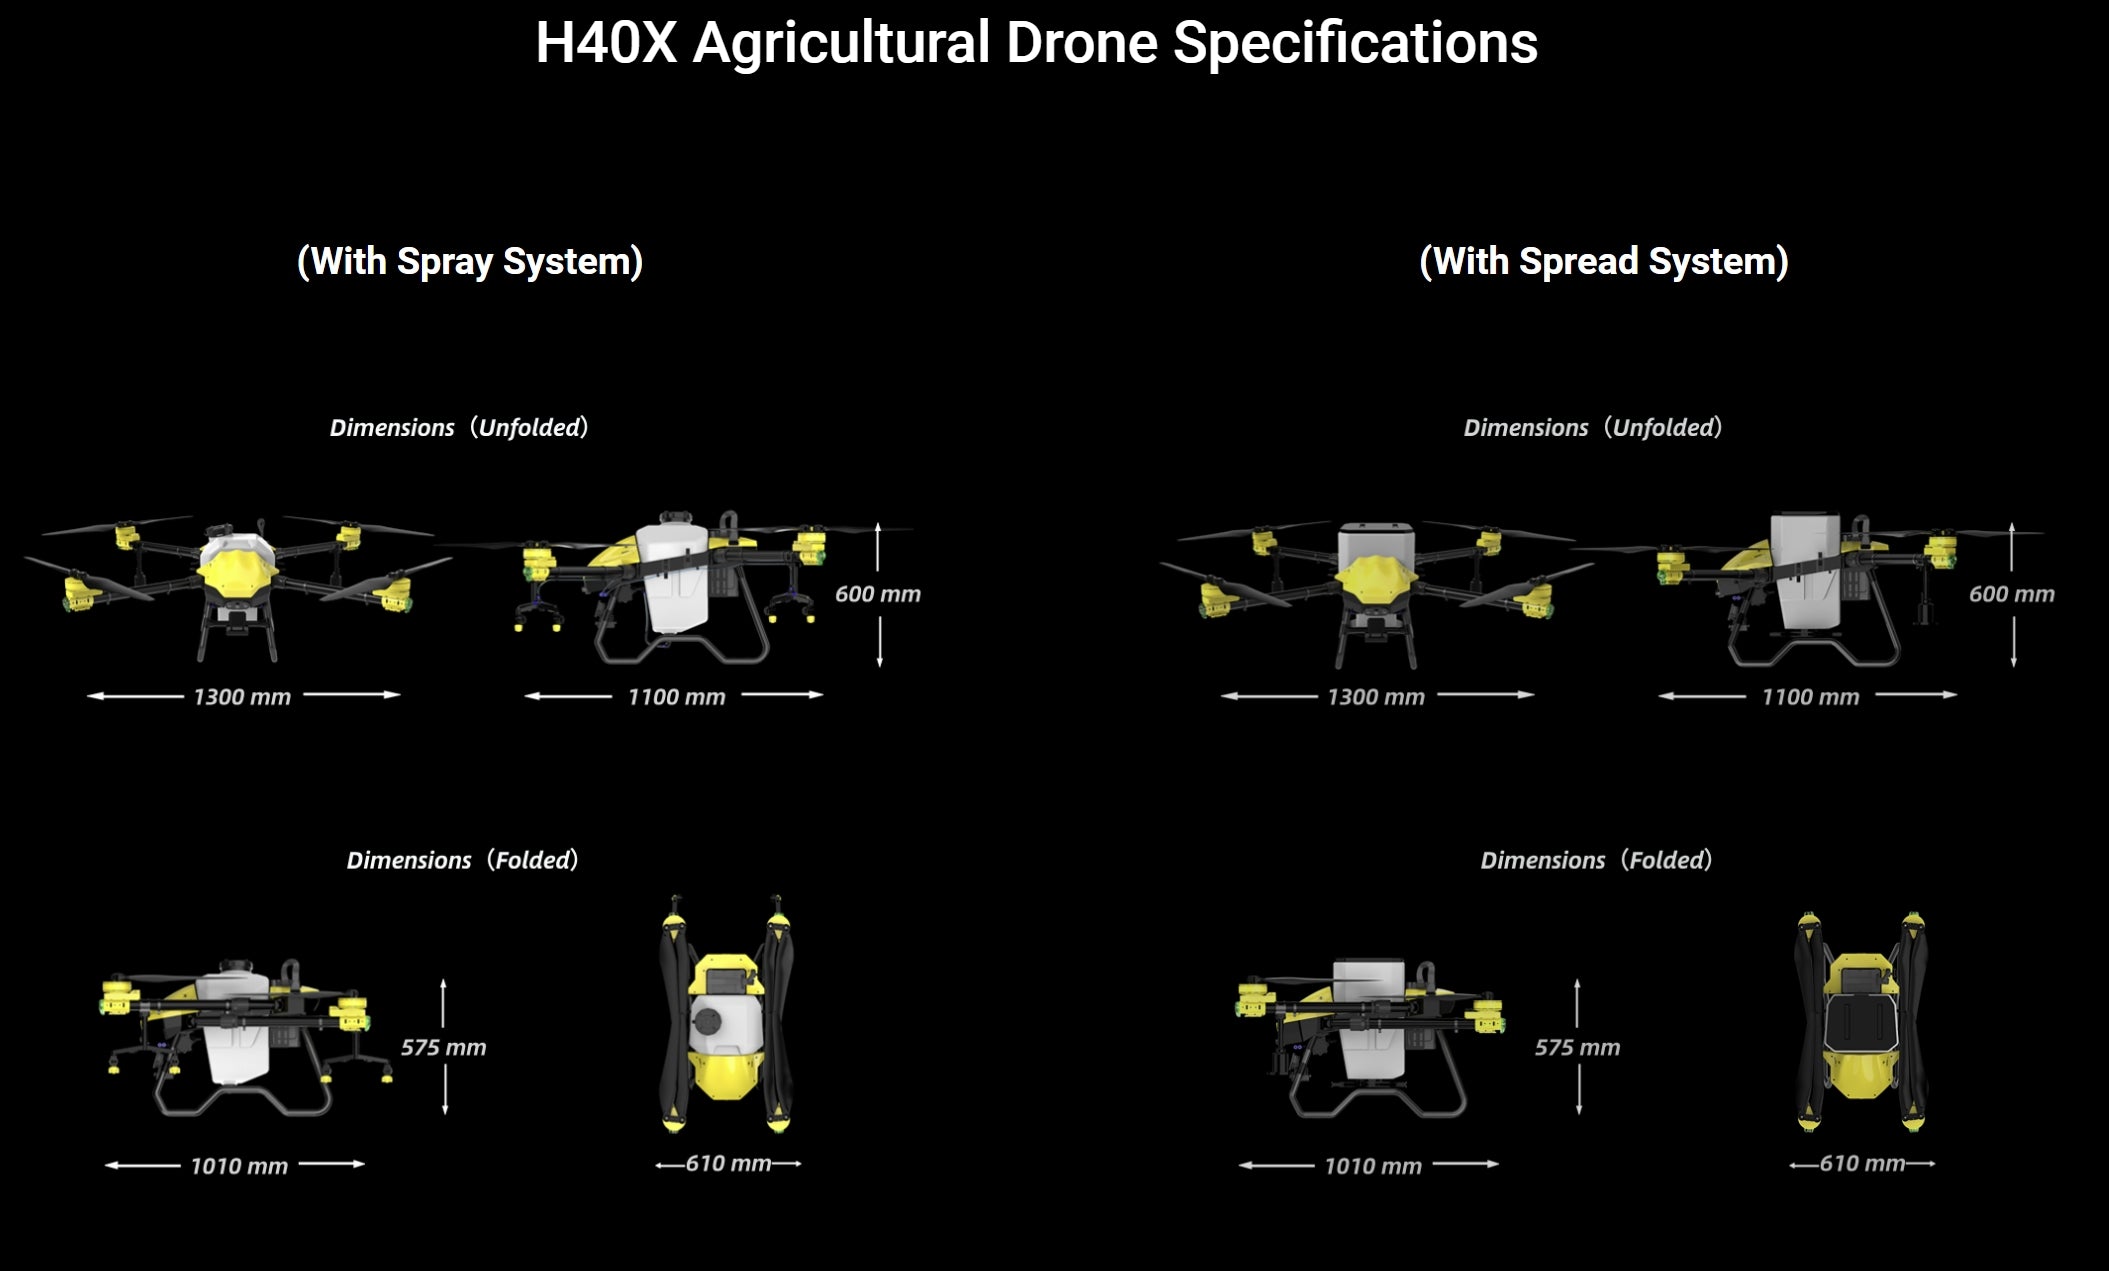 H40X Agriculture Drone, H4OX Agricultural Drone Specifications (With Spray System) (With Spread System